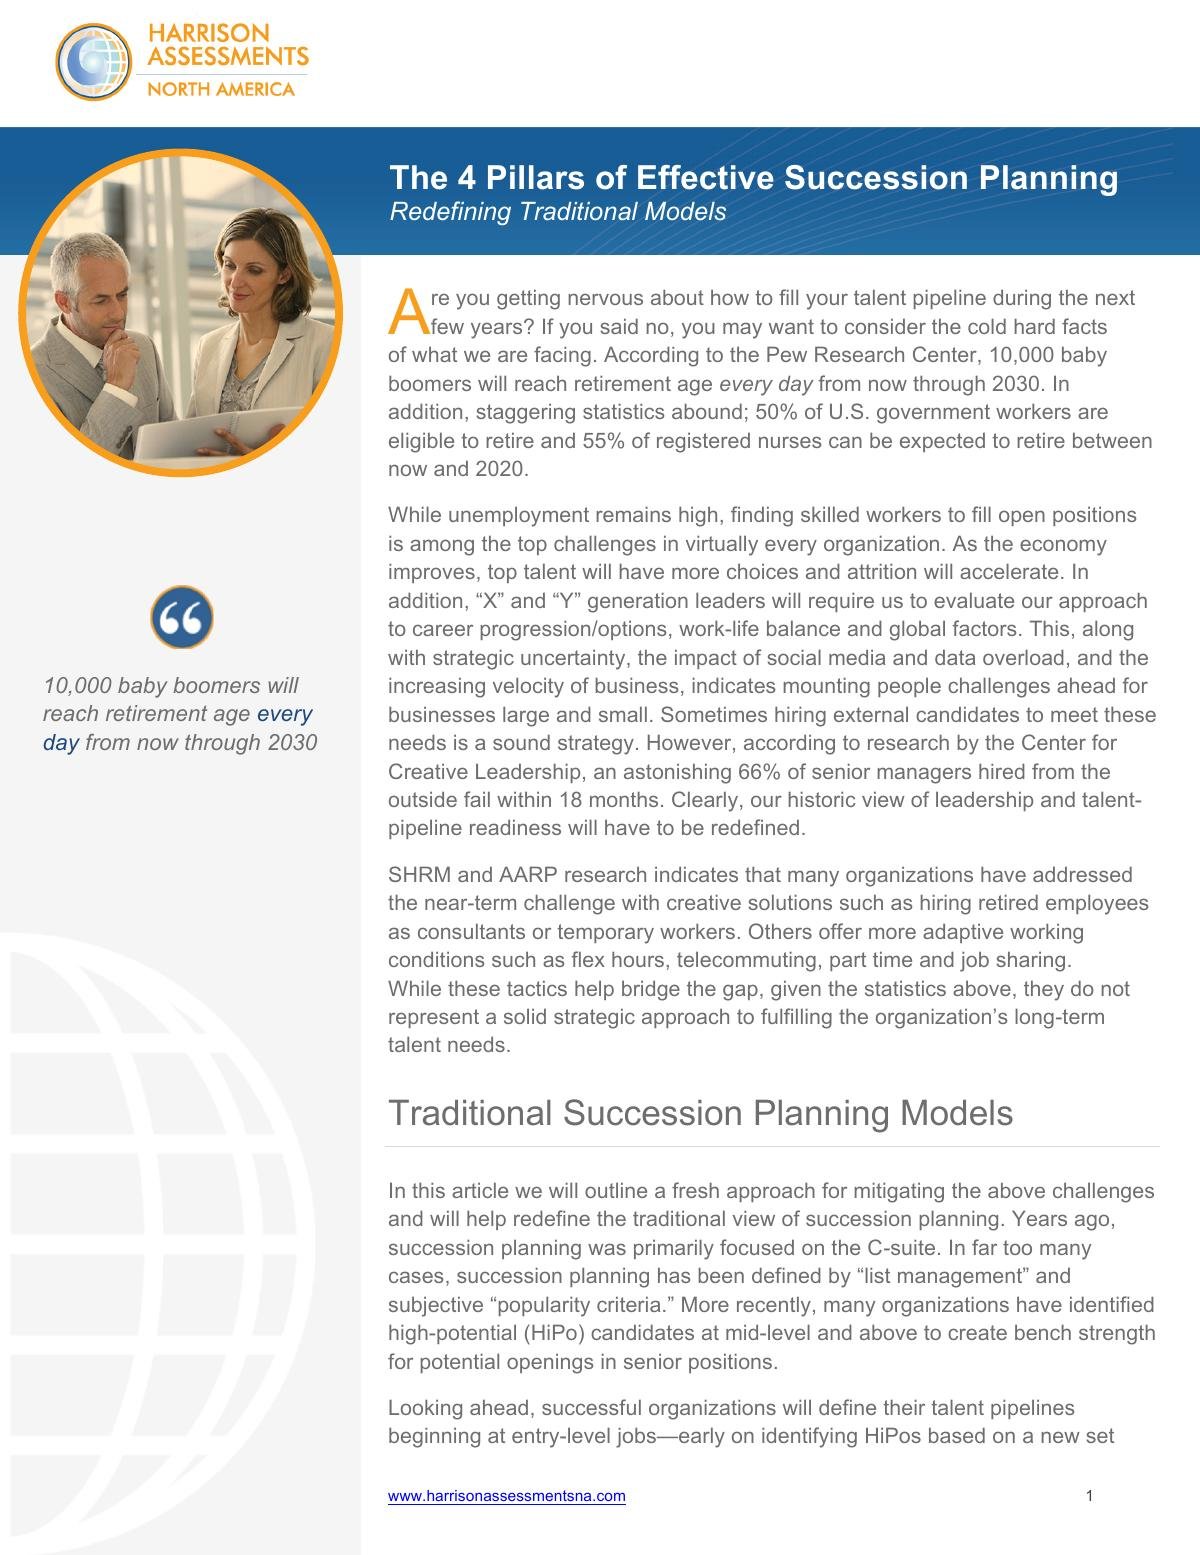  The 4 Pillars of Effective Succession Planning: Redefining Traditional Models